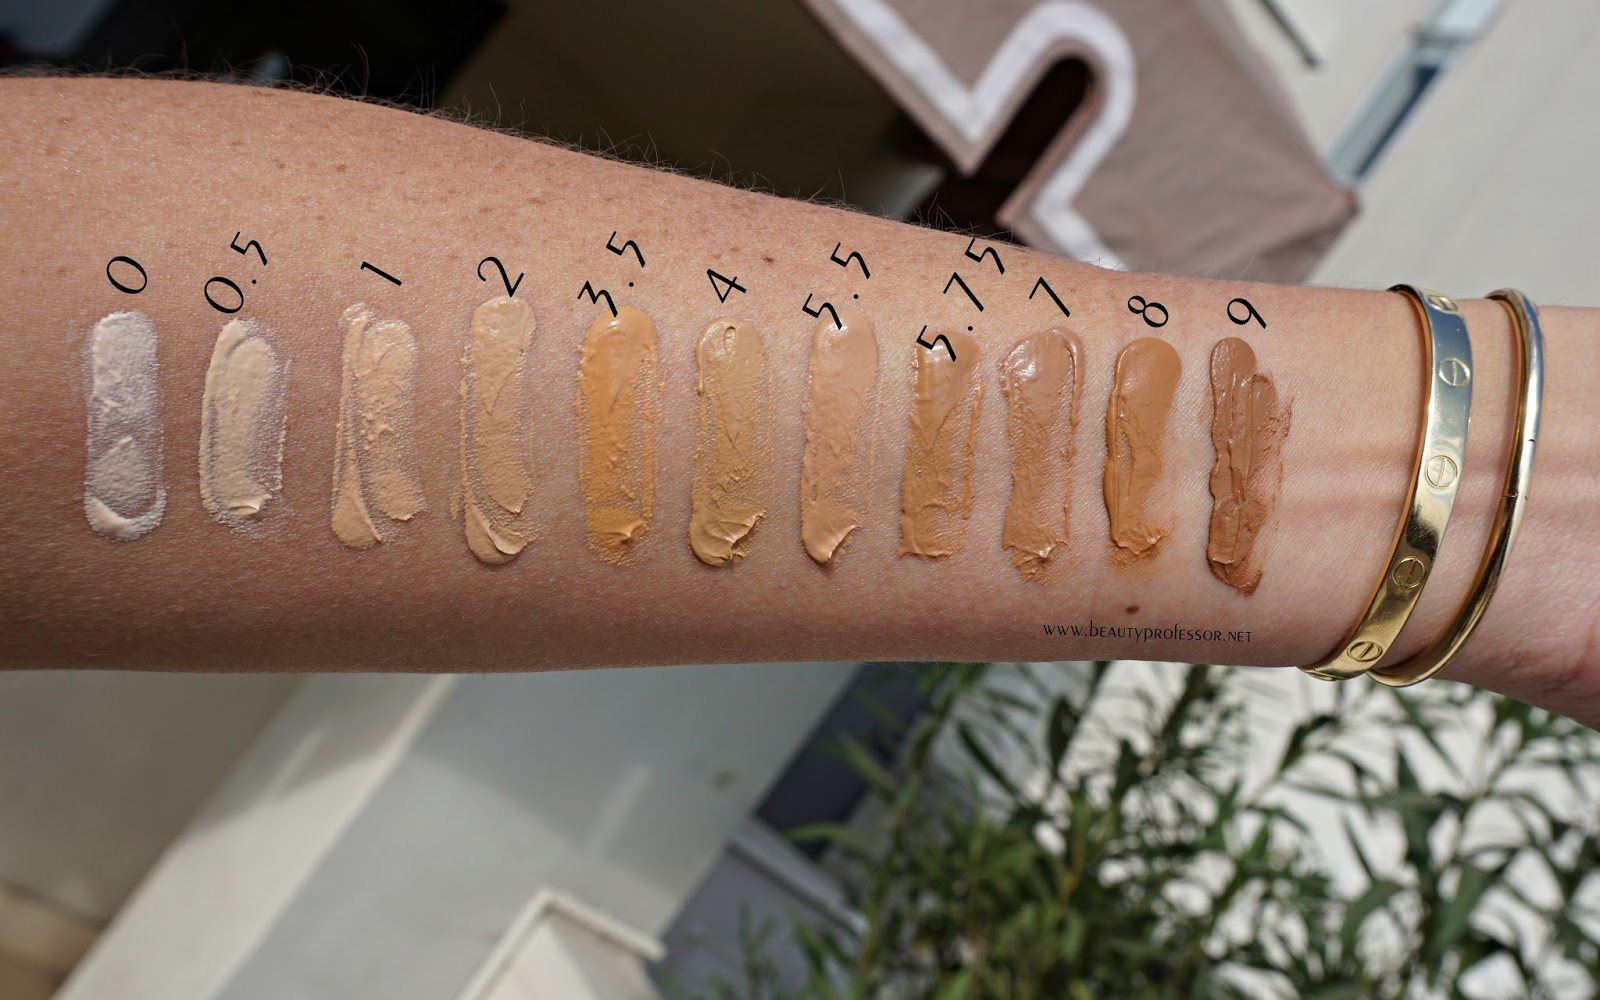 armani face fabric foundation swatches